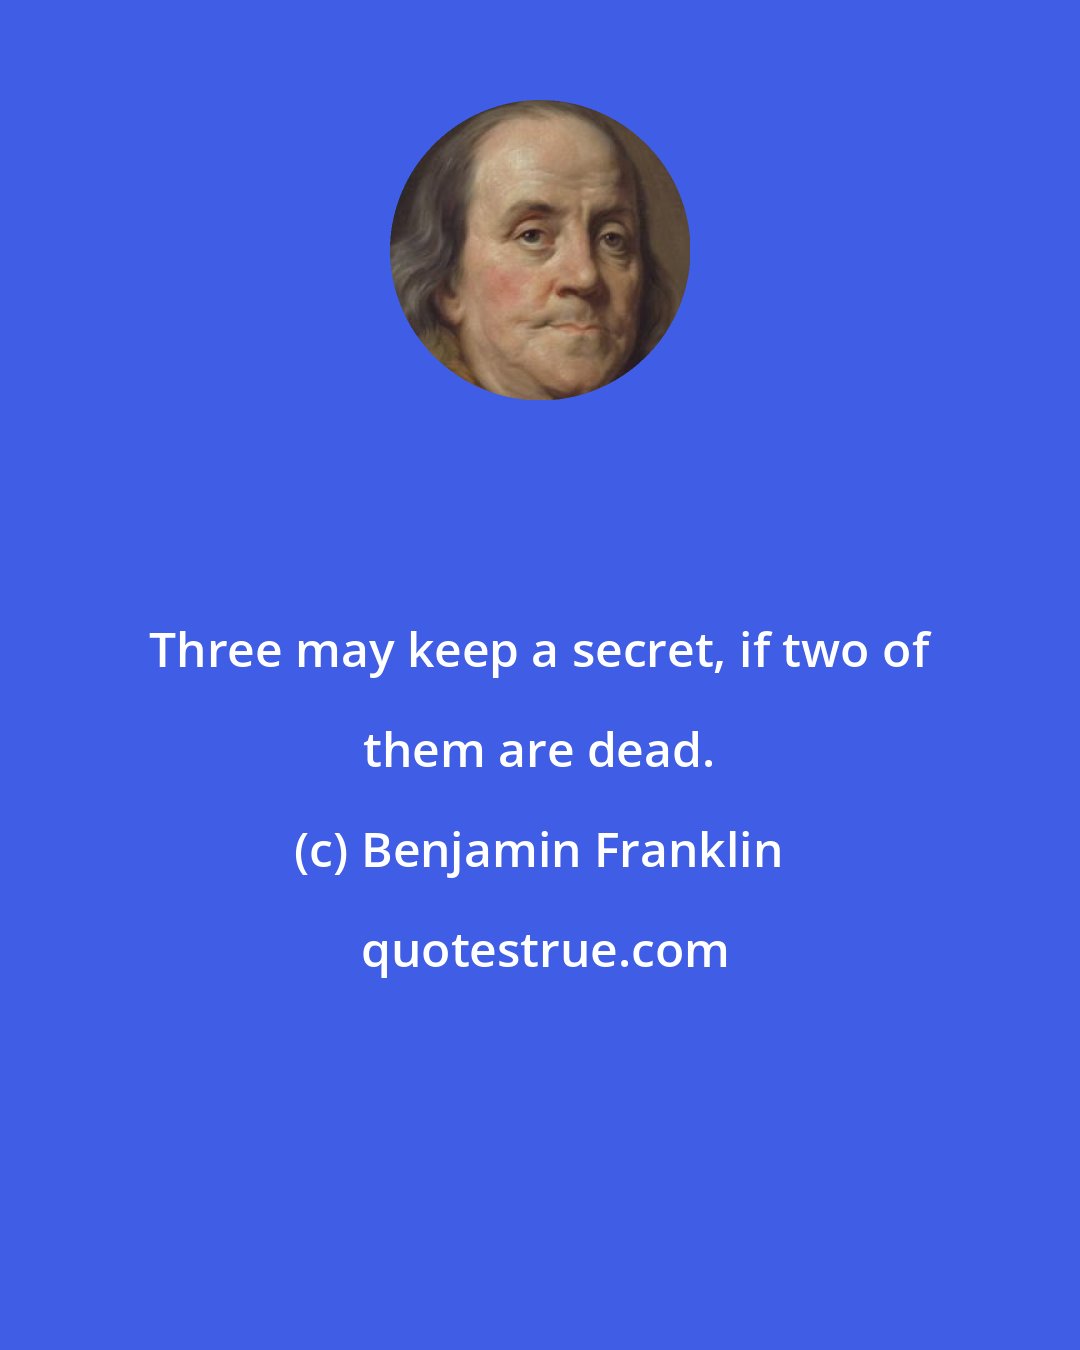 Benjamin Franklin: Three may keep a secret, if two of them are dead.